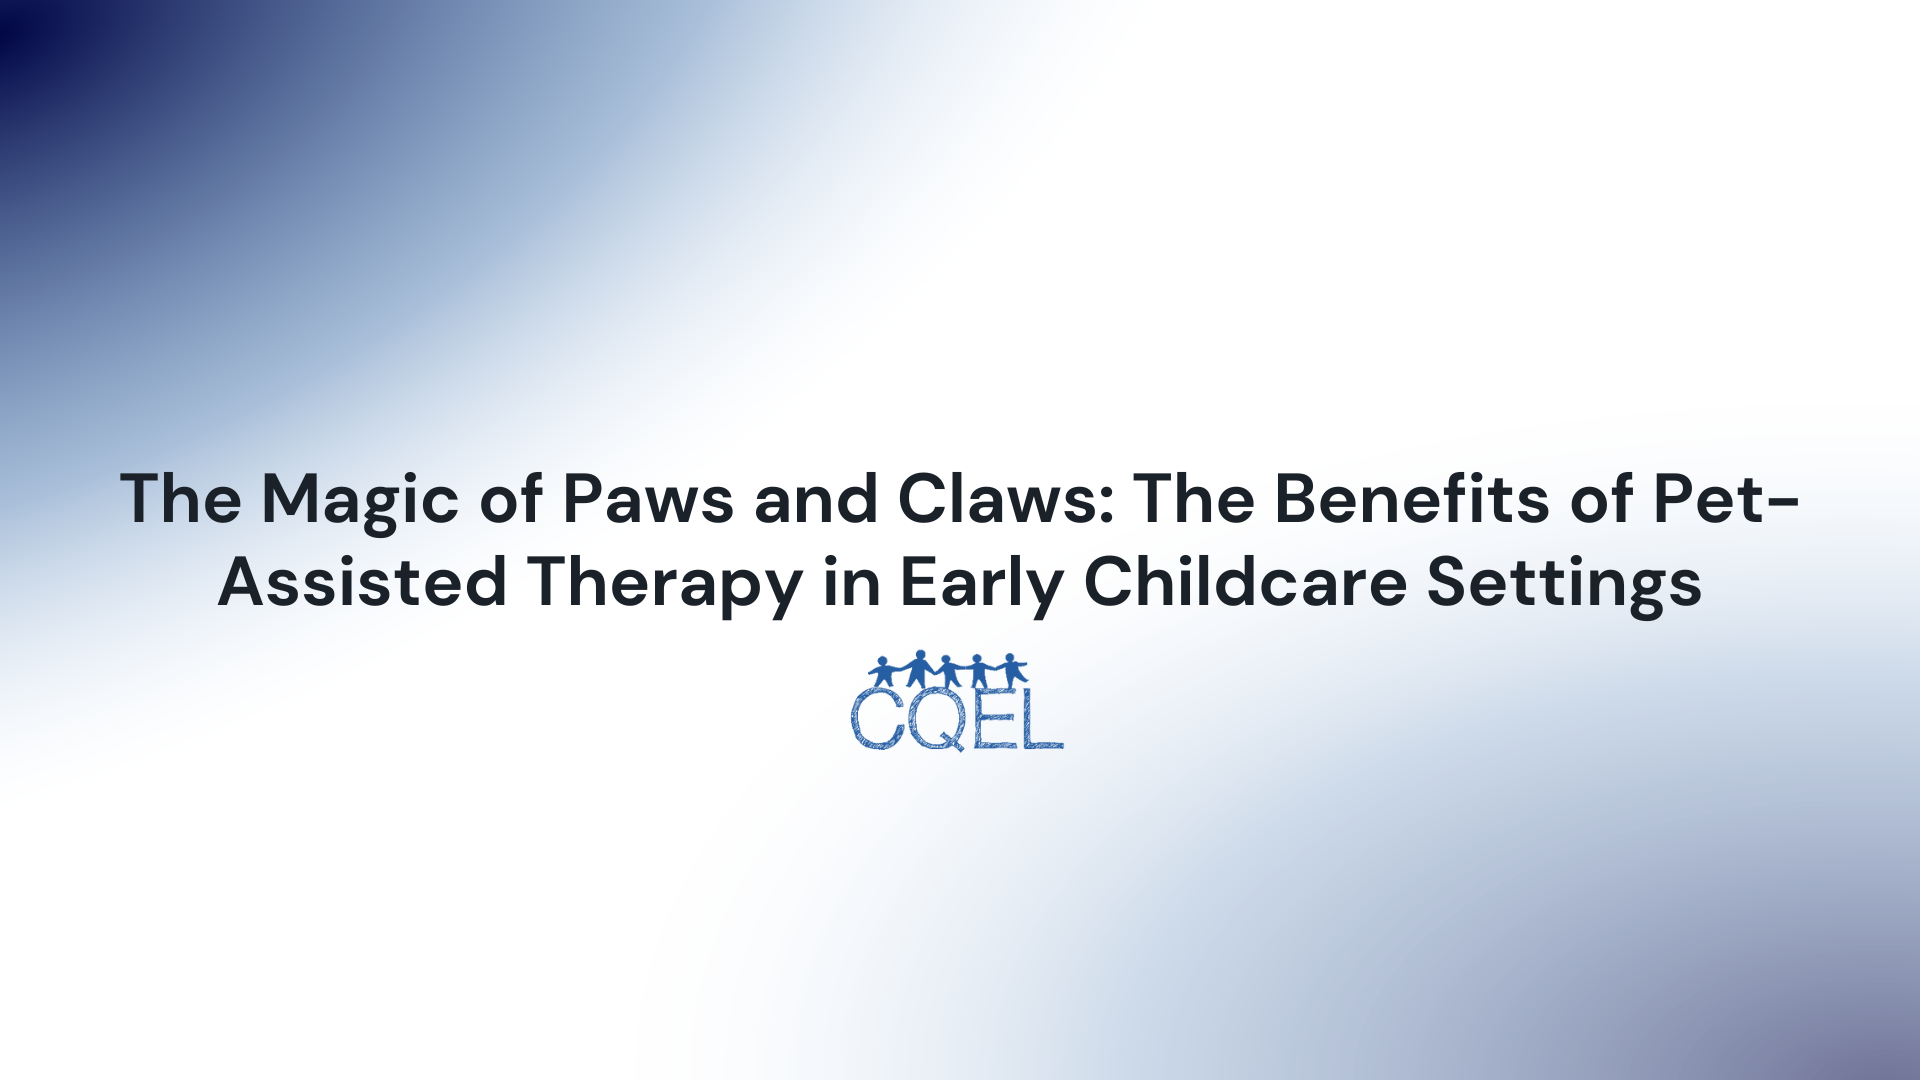 The Magic of Paws and Claws: The Benefits of Pet-Assisted Therapy in Early Childcare Settings